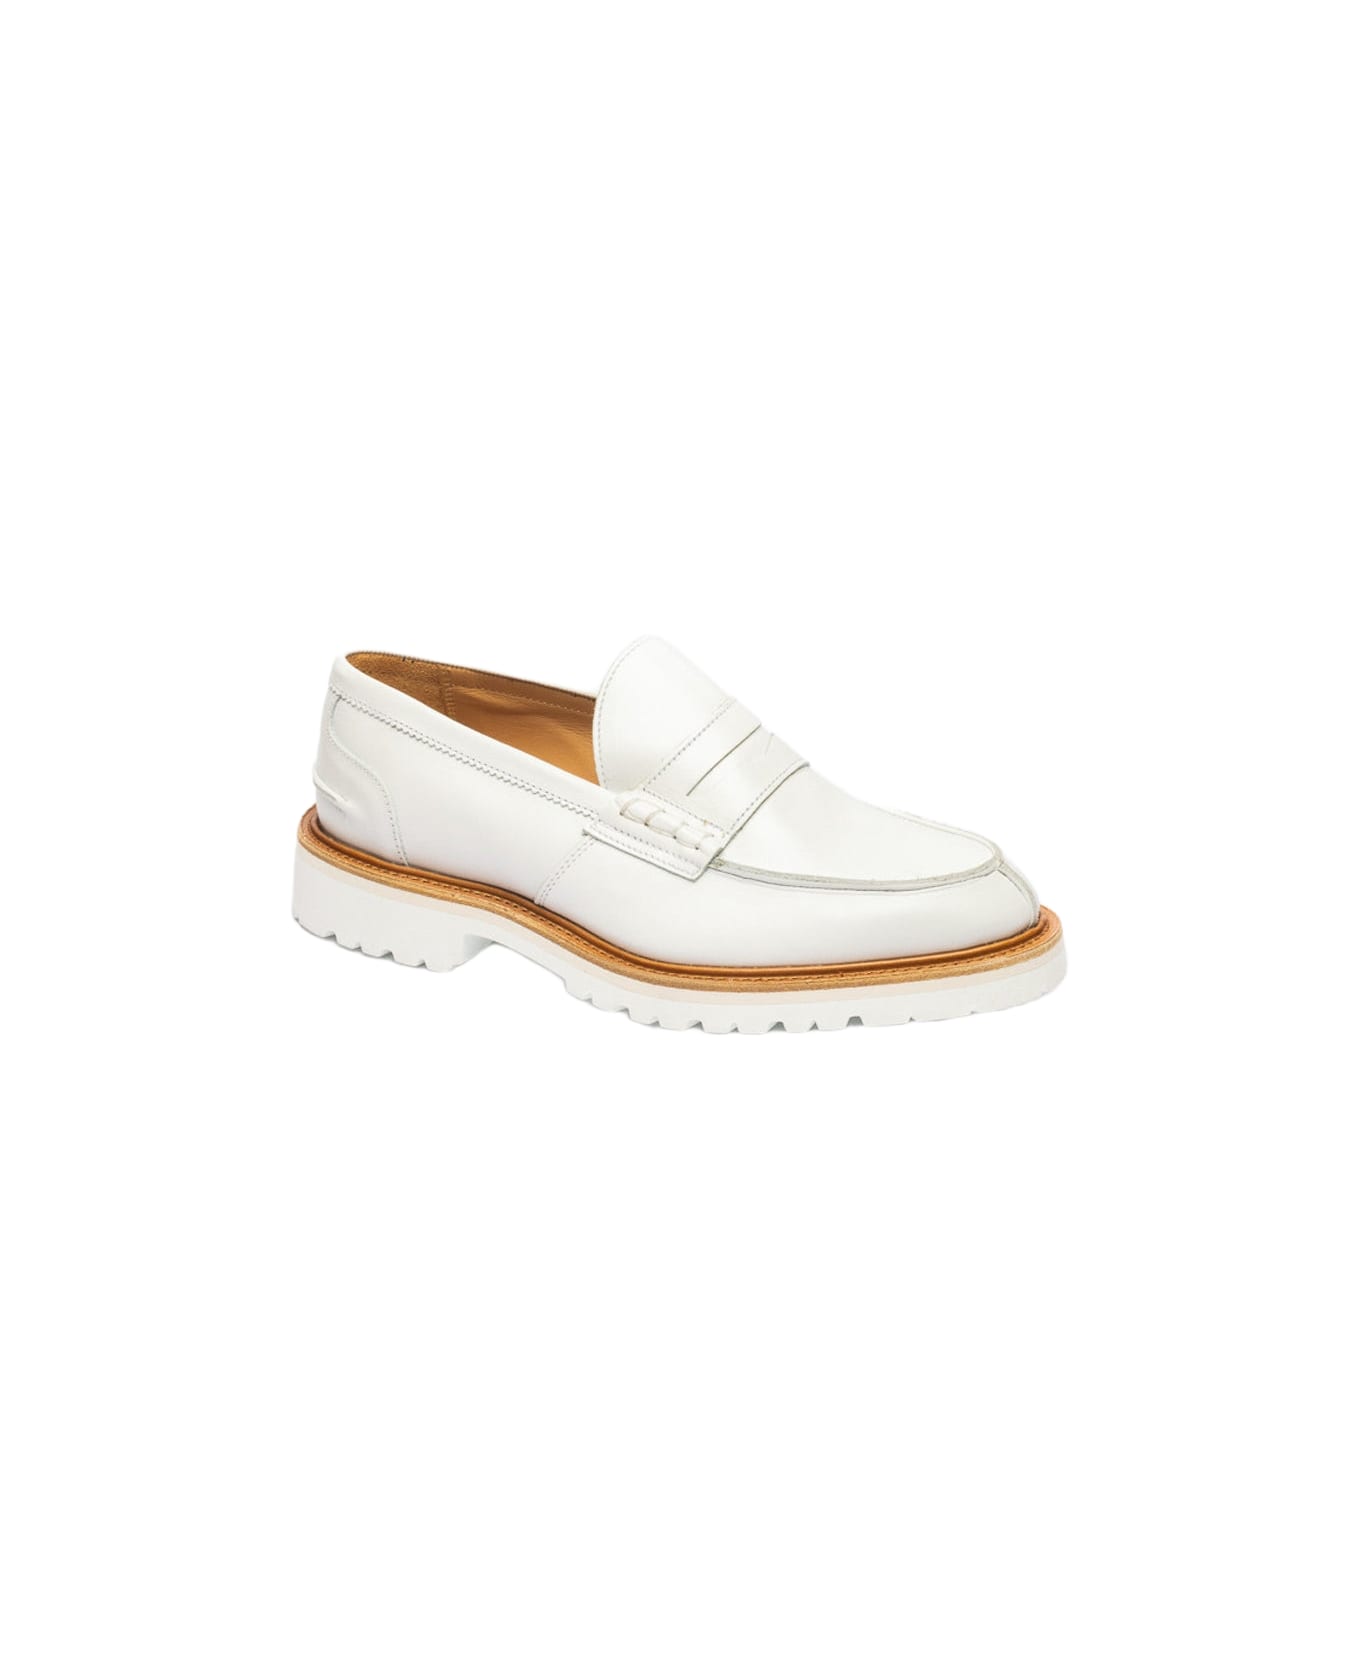 Tricker's White Calf Penny Loafer - Bianco ローファー＆デッキシューズ